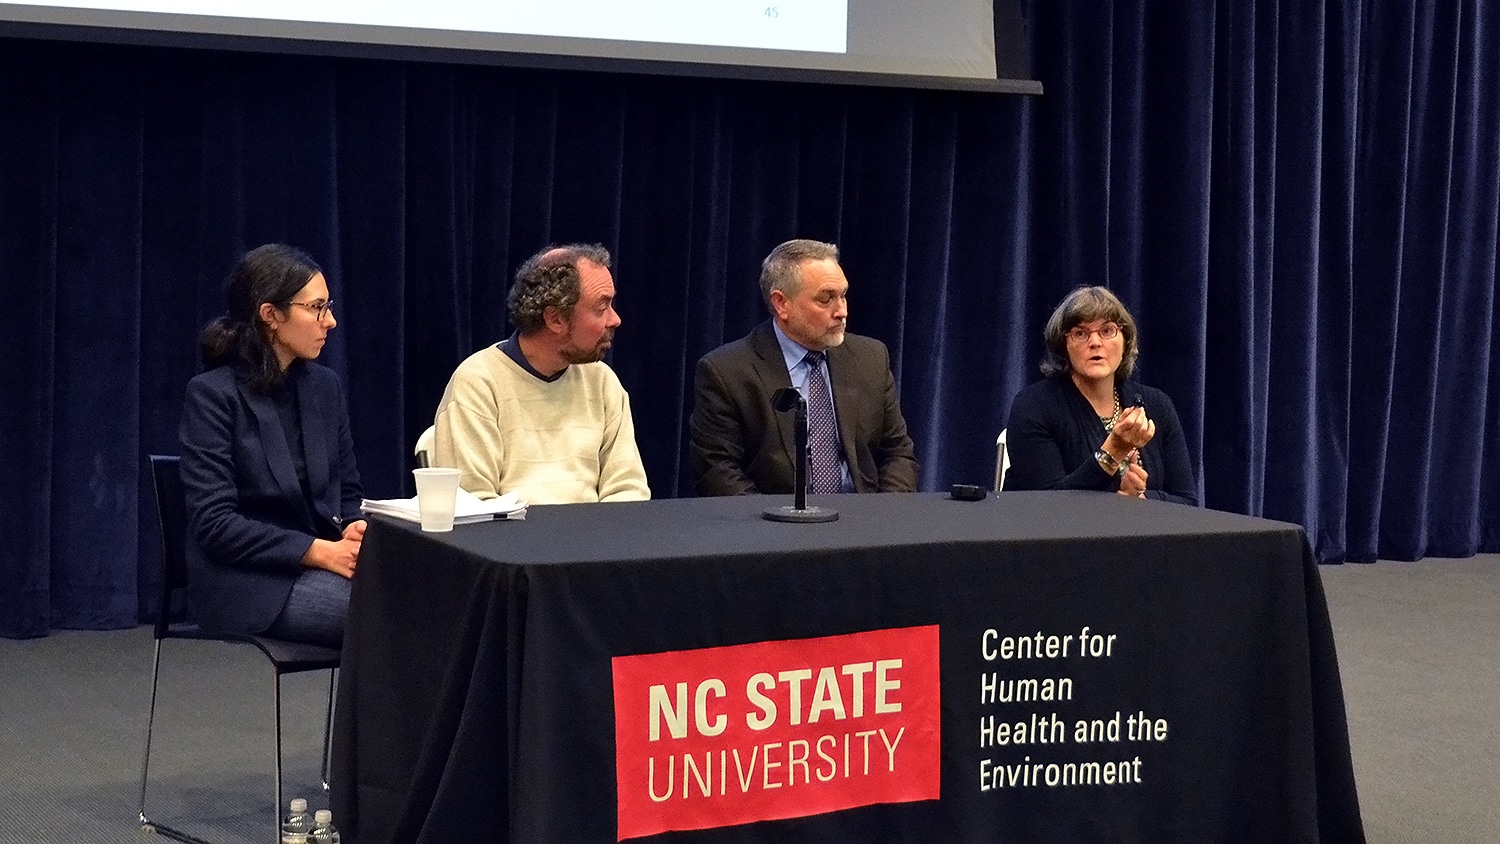 Four panelists sit behind a table with a NC State University Center for Human Health and the Environment banner